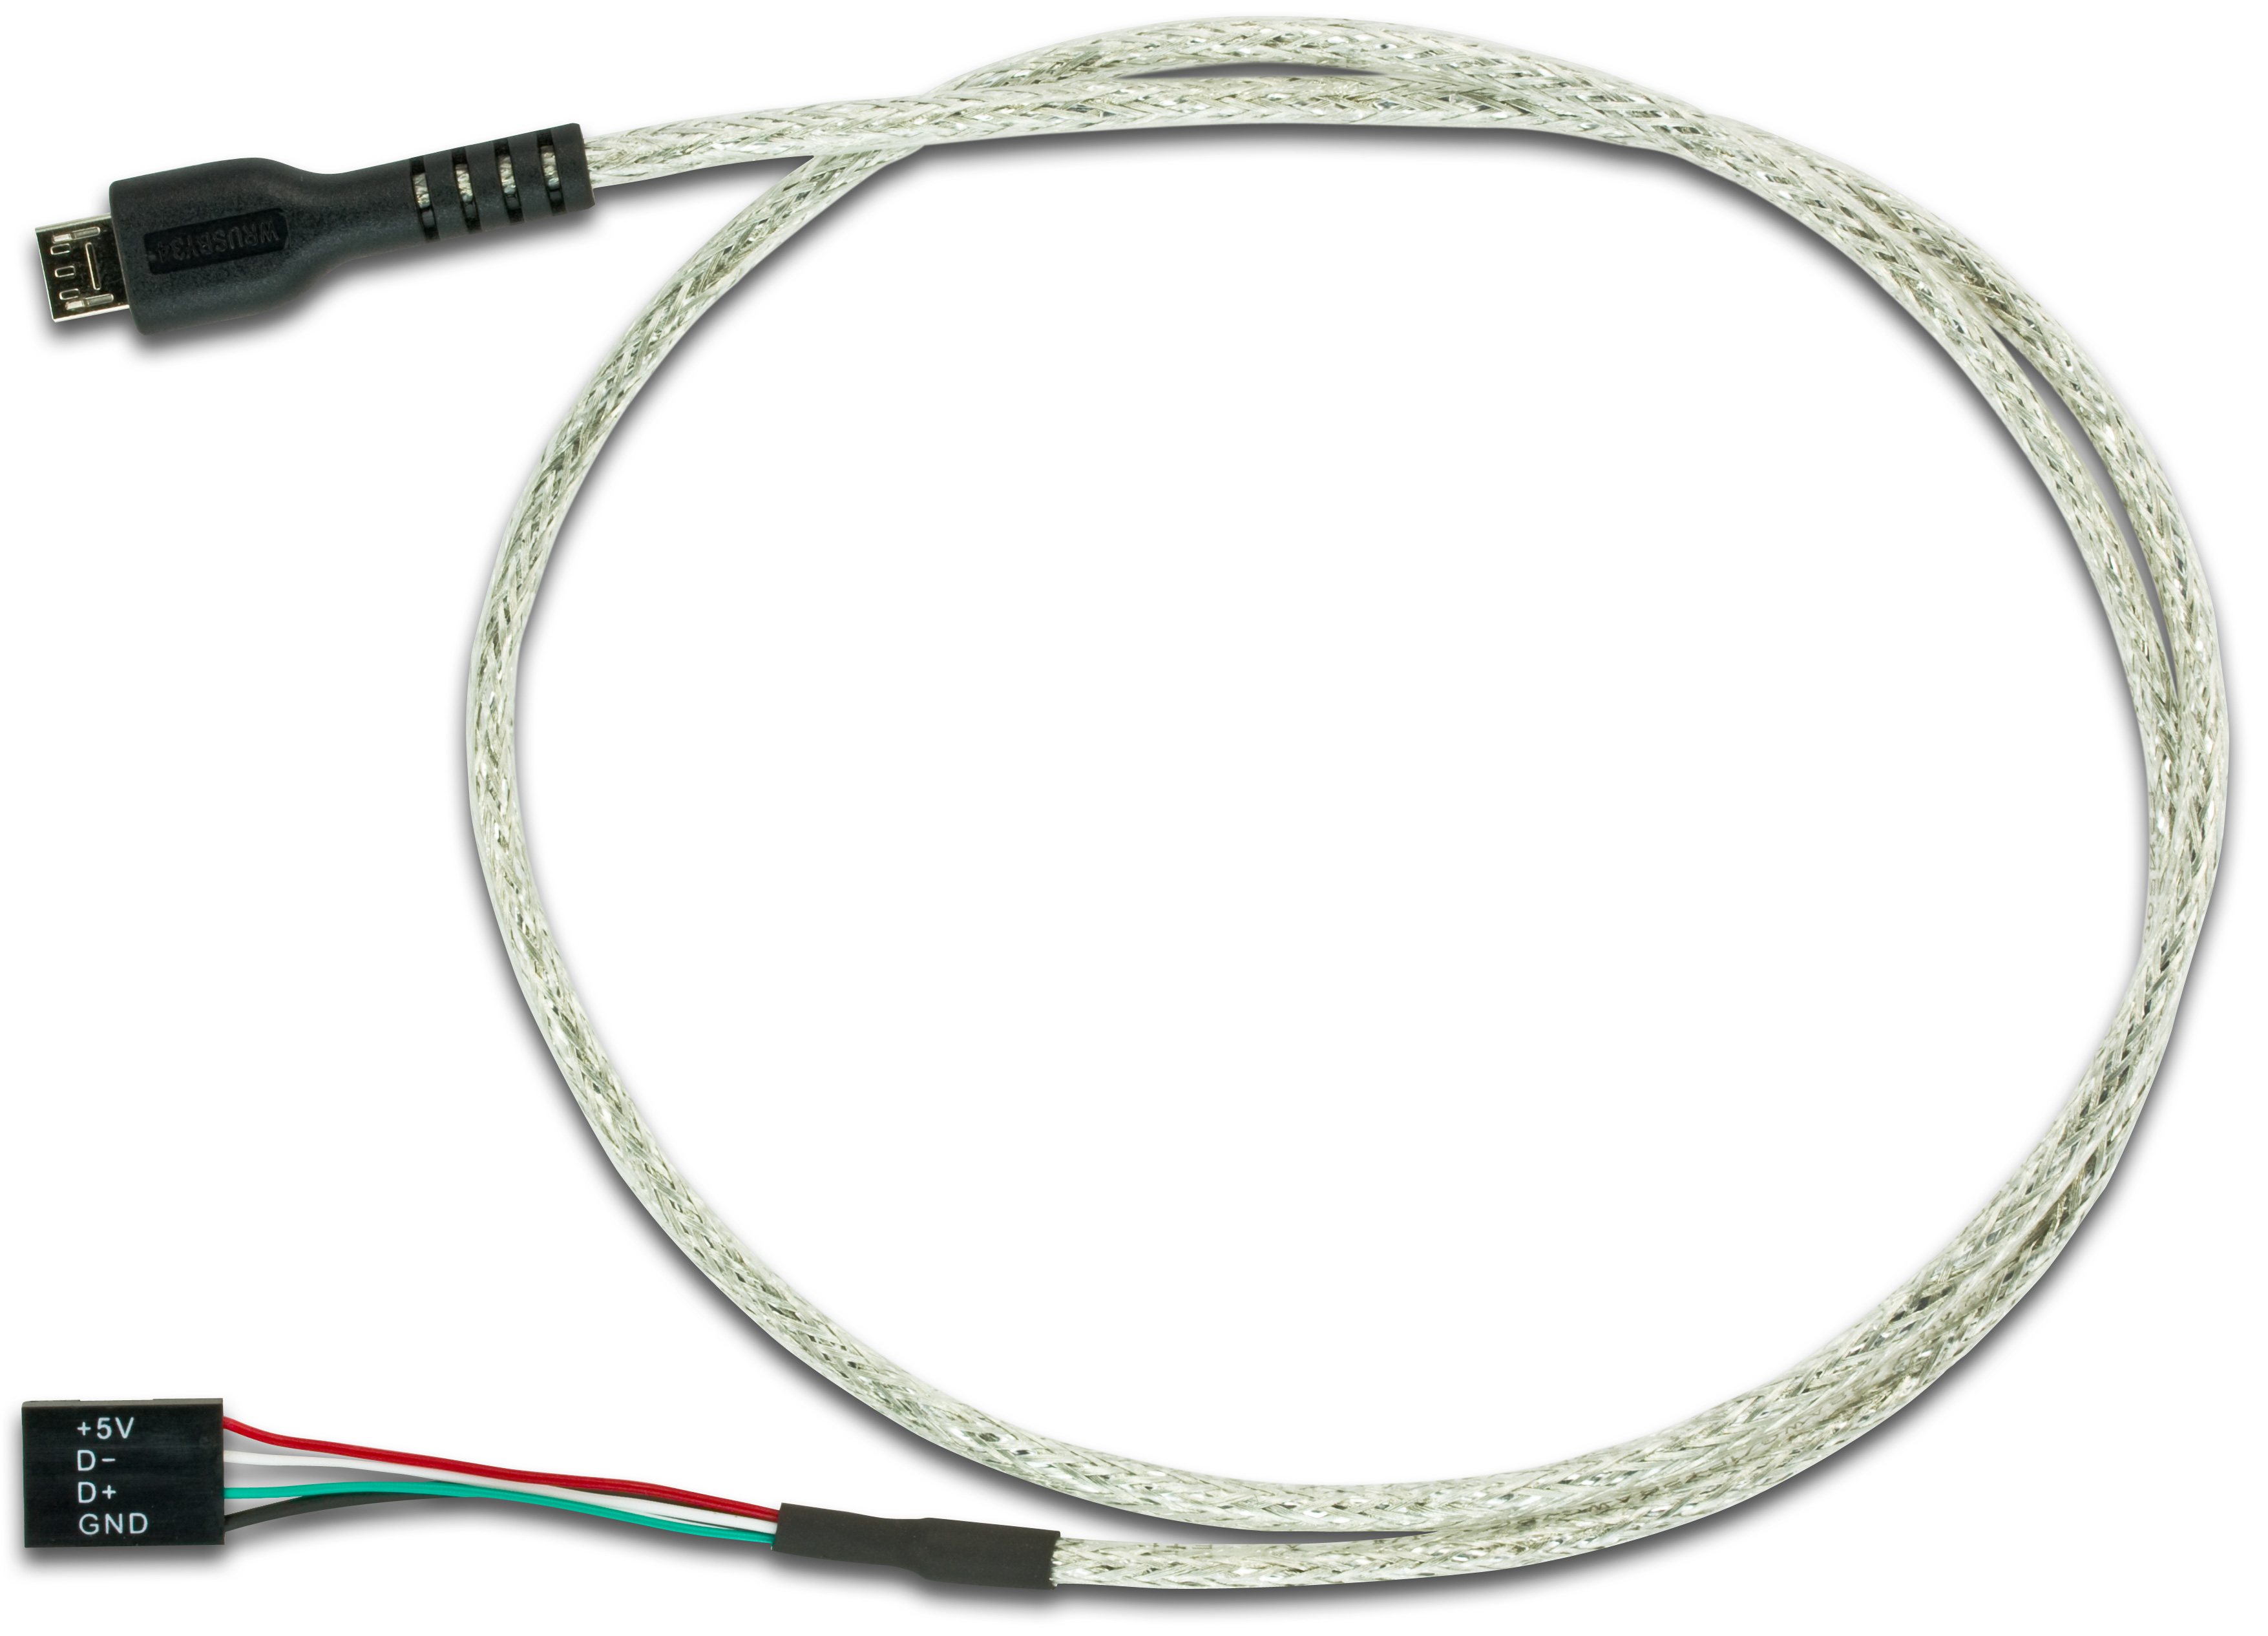 Micro USB to 4-Pin Cable from Crystalfontz